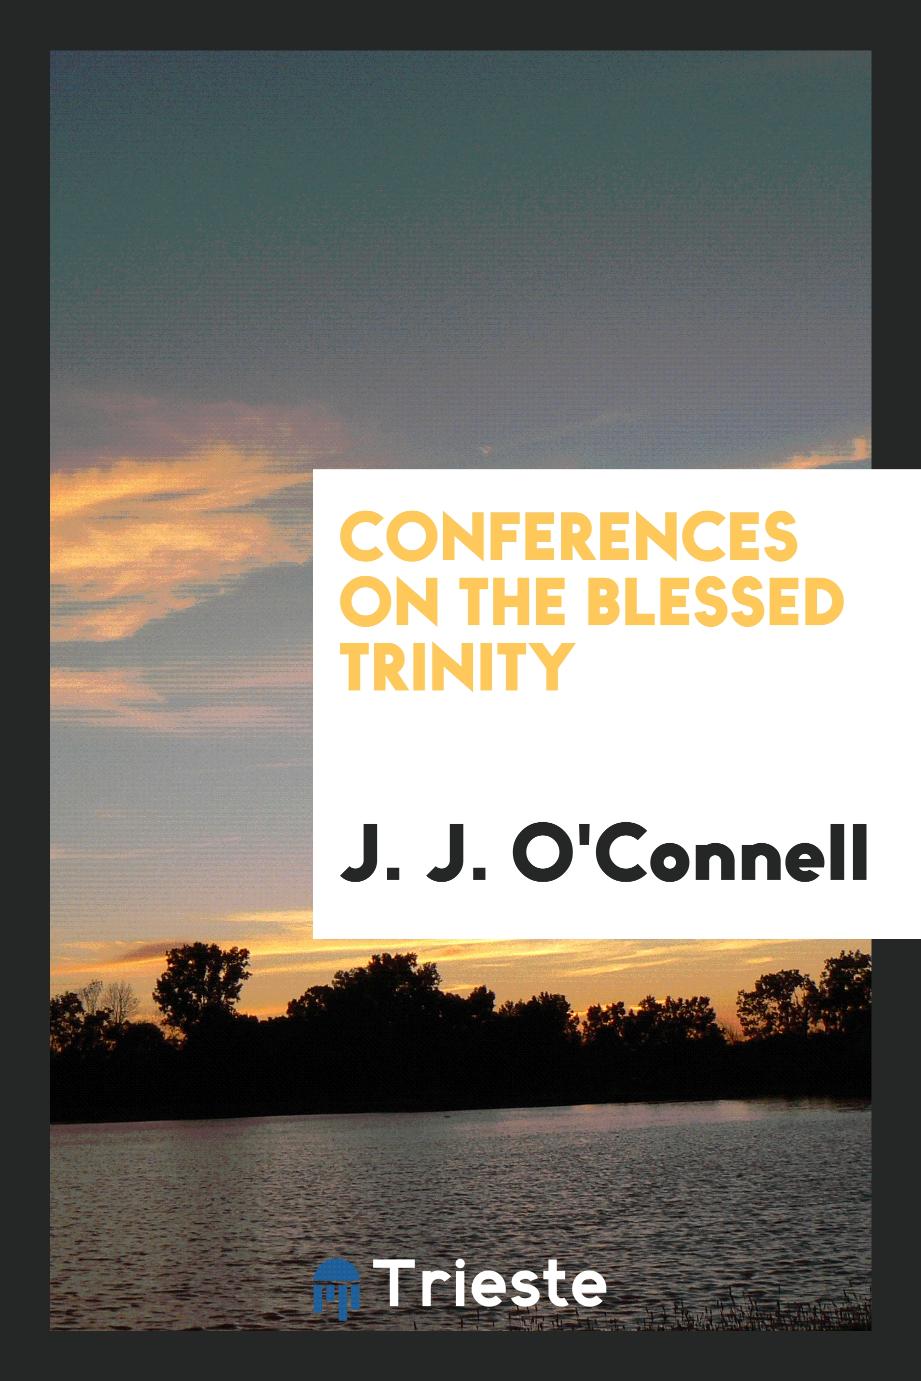 Conferences on the Blessed Trinity